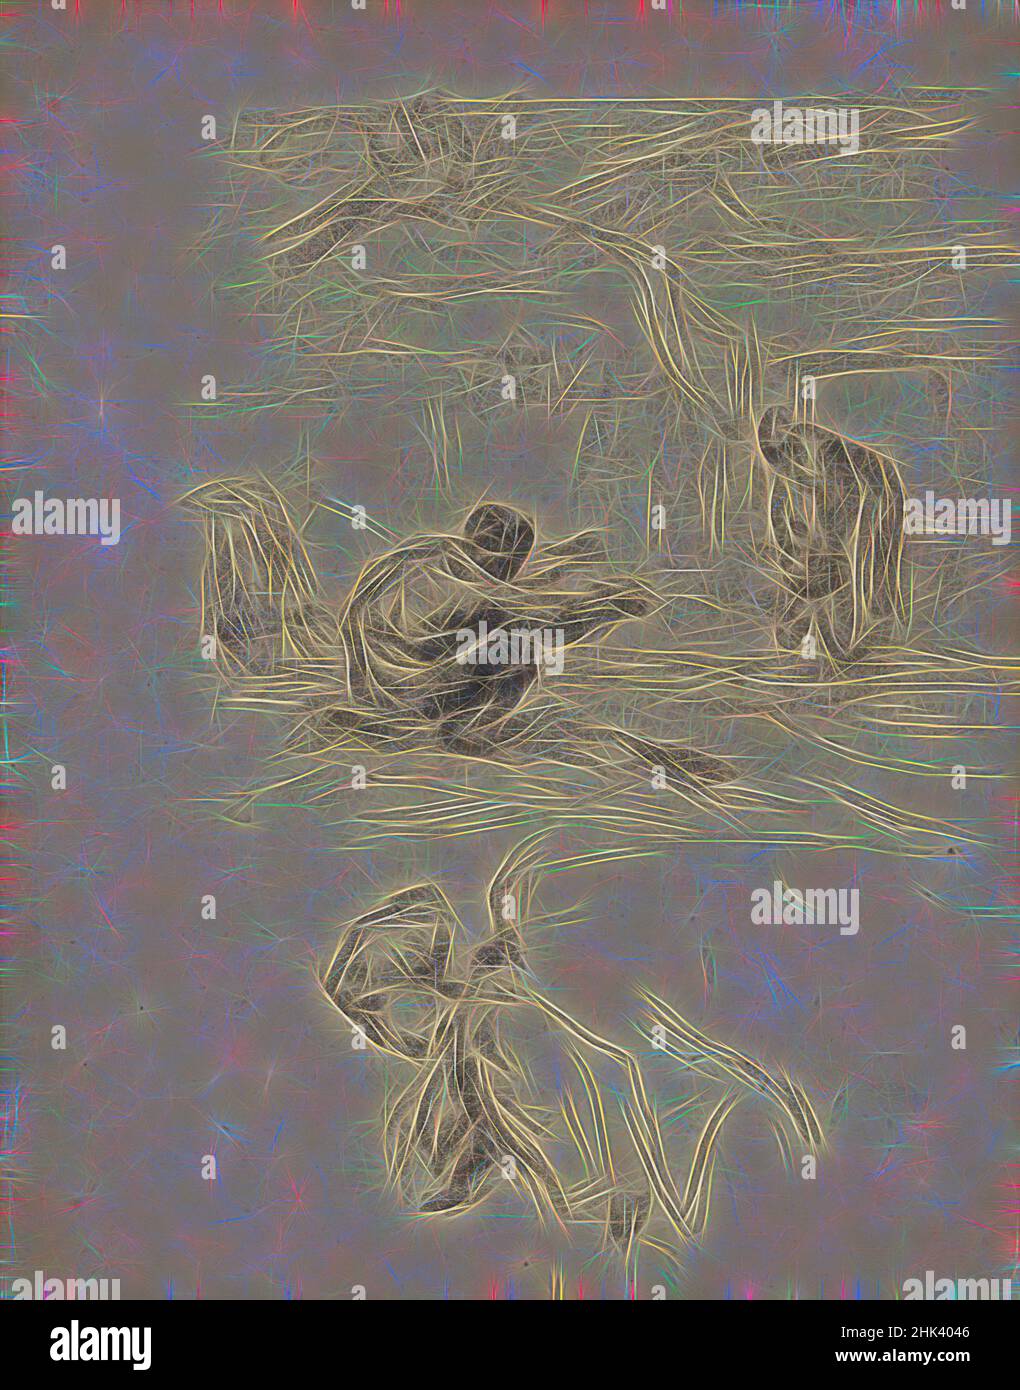 Inspired by The first steps, James Ensor, 1880, drawing, between circa 1880 and circa 1885, Belgian Art, Reimagined by Artotop. Classic art reinvented with a modern twist. Design of warm cheerful glowing of brightness and light ray radiance. Photography inspired by surrealism and futurism, embracing dynamic energy of modern technology, movement, speed and revolutionize culture Stock Photo